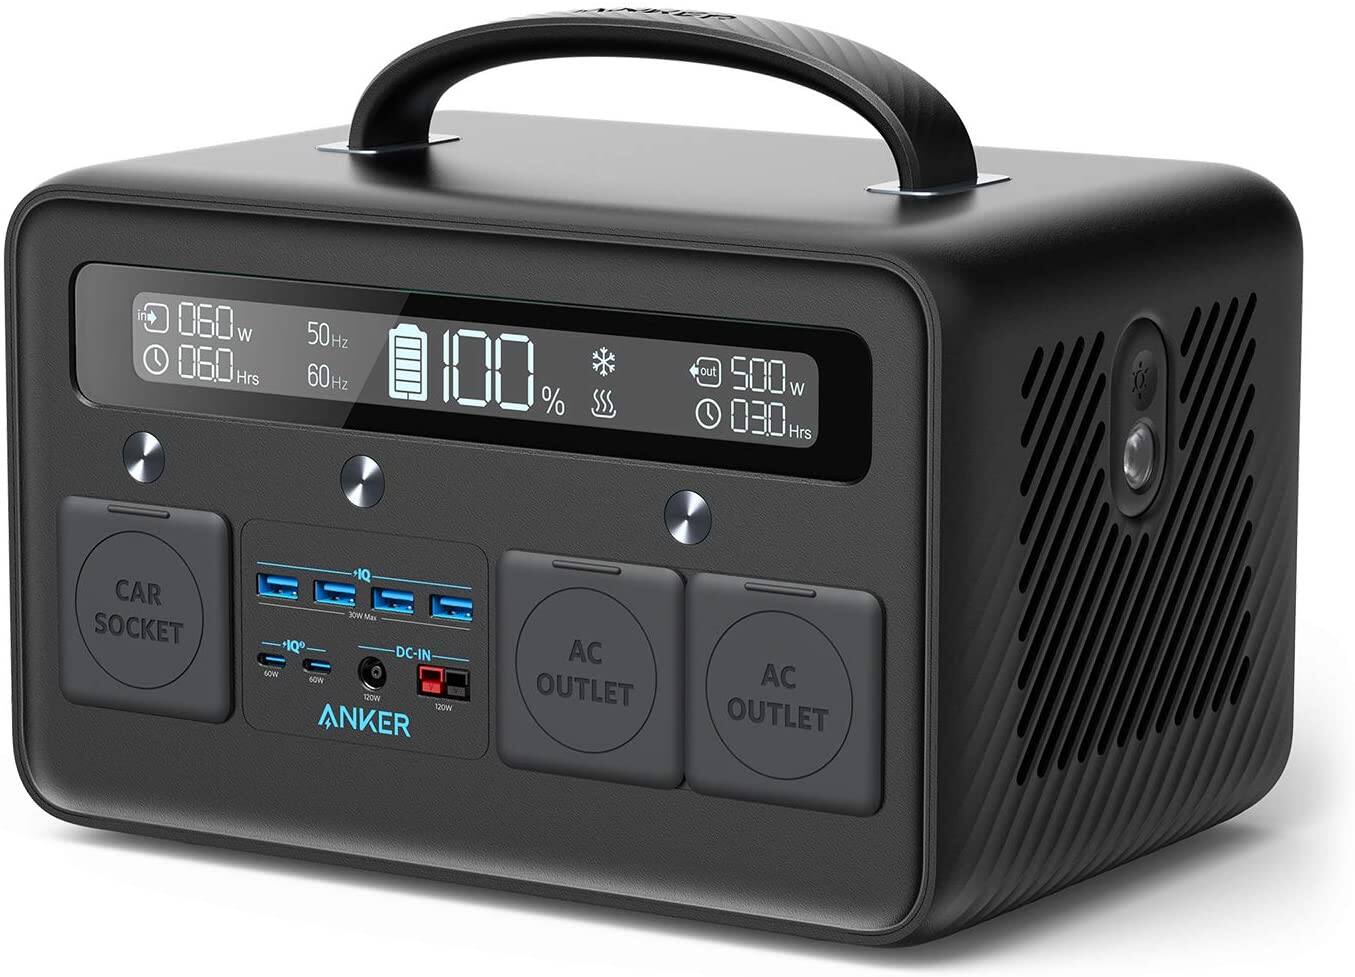 Anker Portable Power Station, PowerHouse II 800, 500W/777Wh Solar Generator with 110V/500W 2-AC Outlets, 2X 60W Power Delivery Outputs & LED Flashlight for $519.99 + Free Shipping